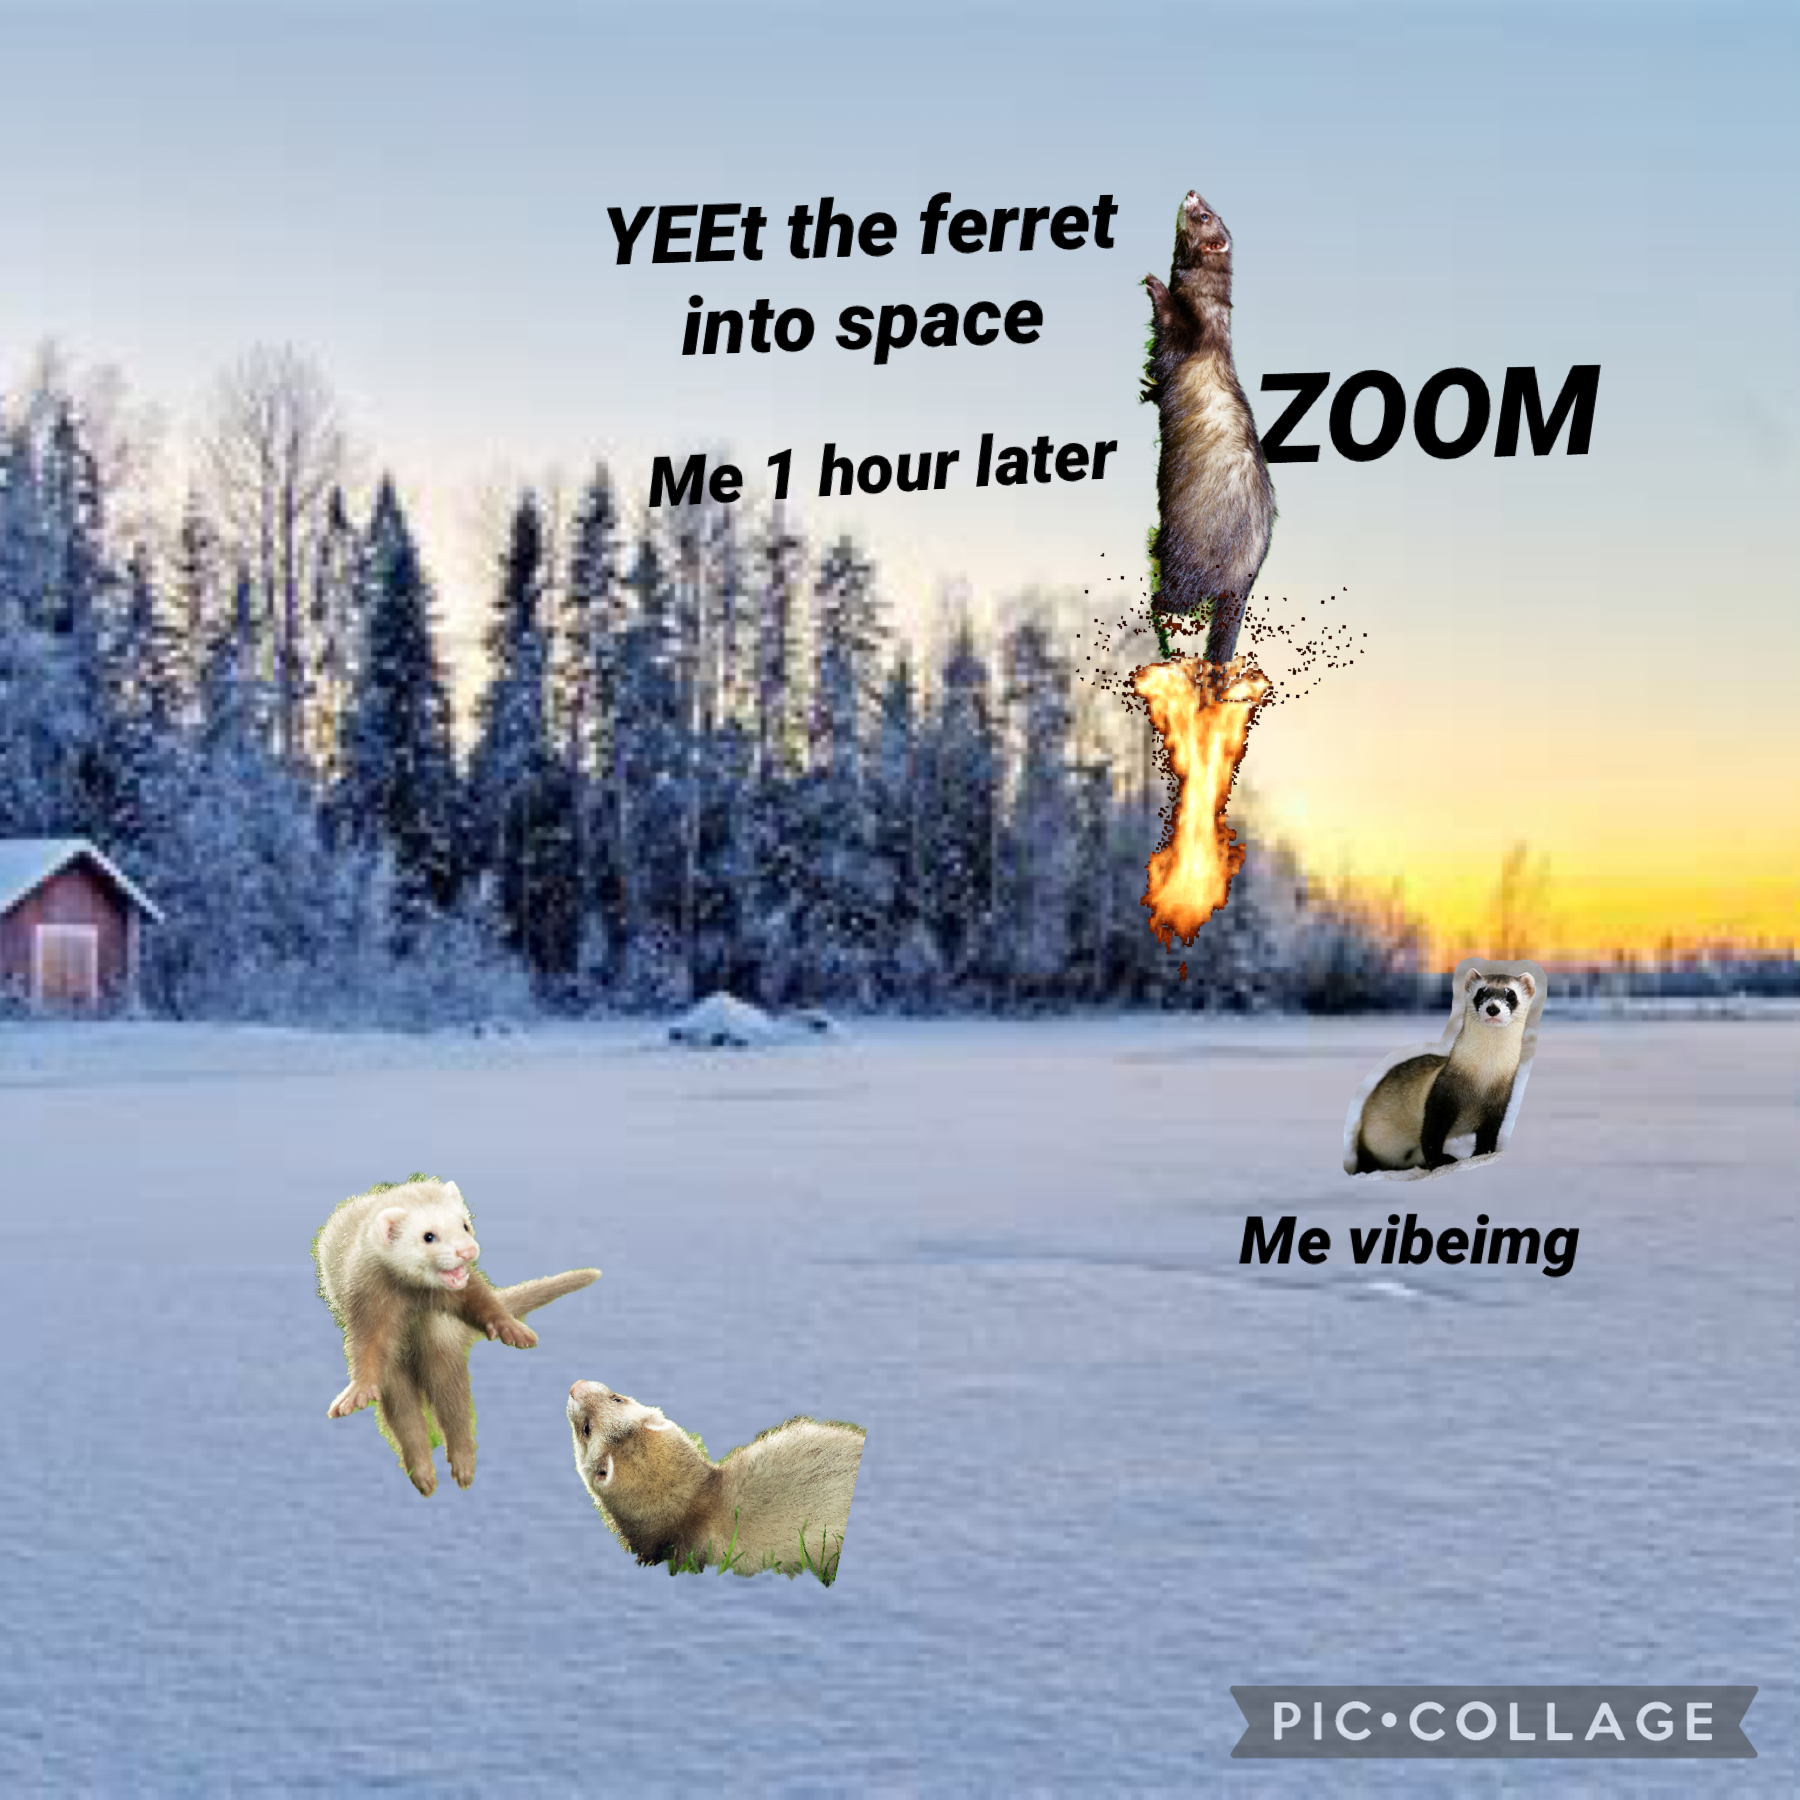 Zoom goes the ferret